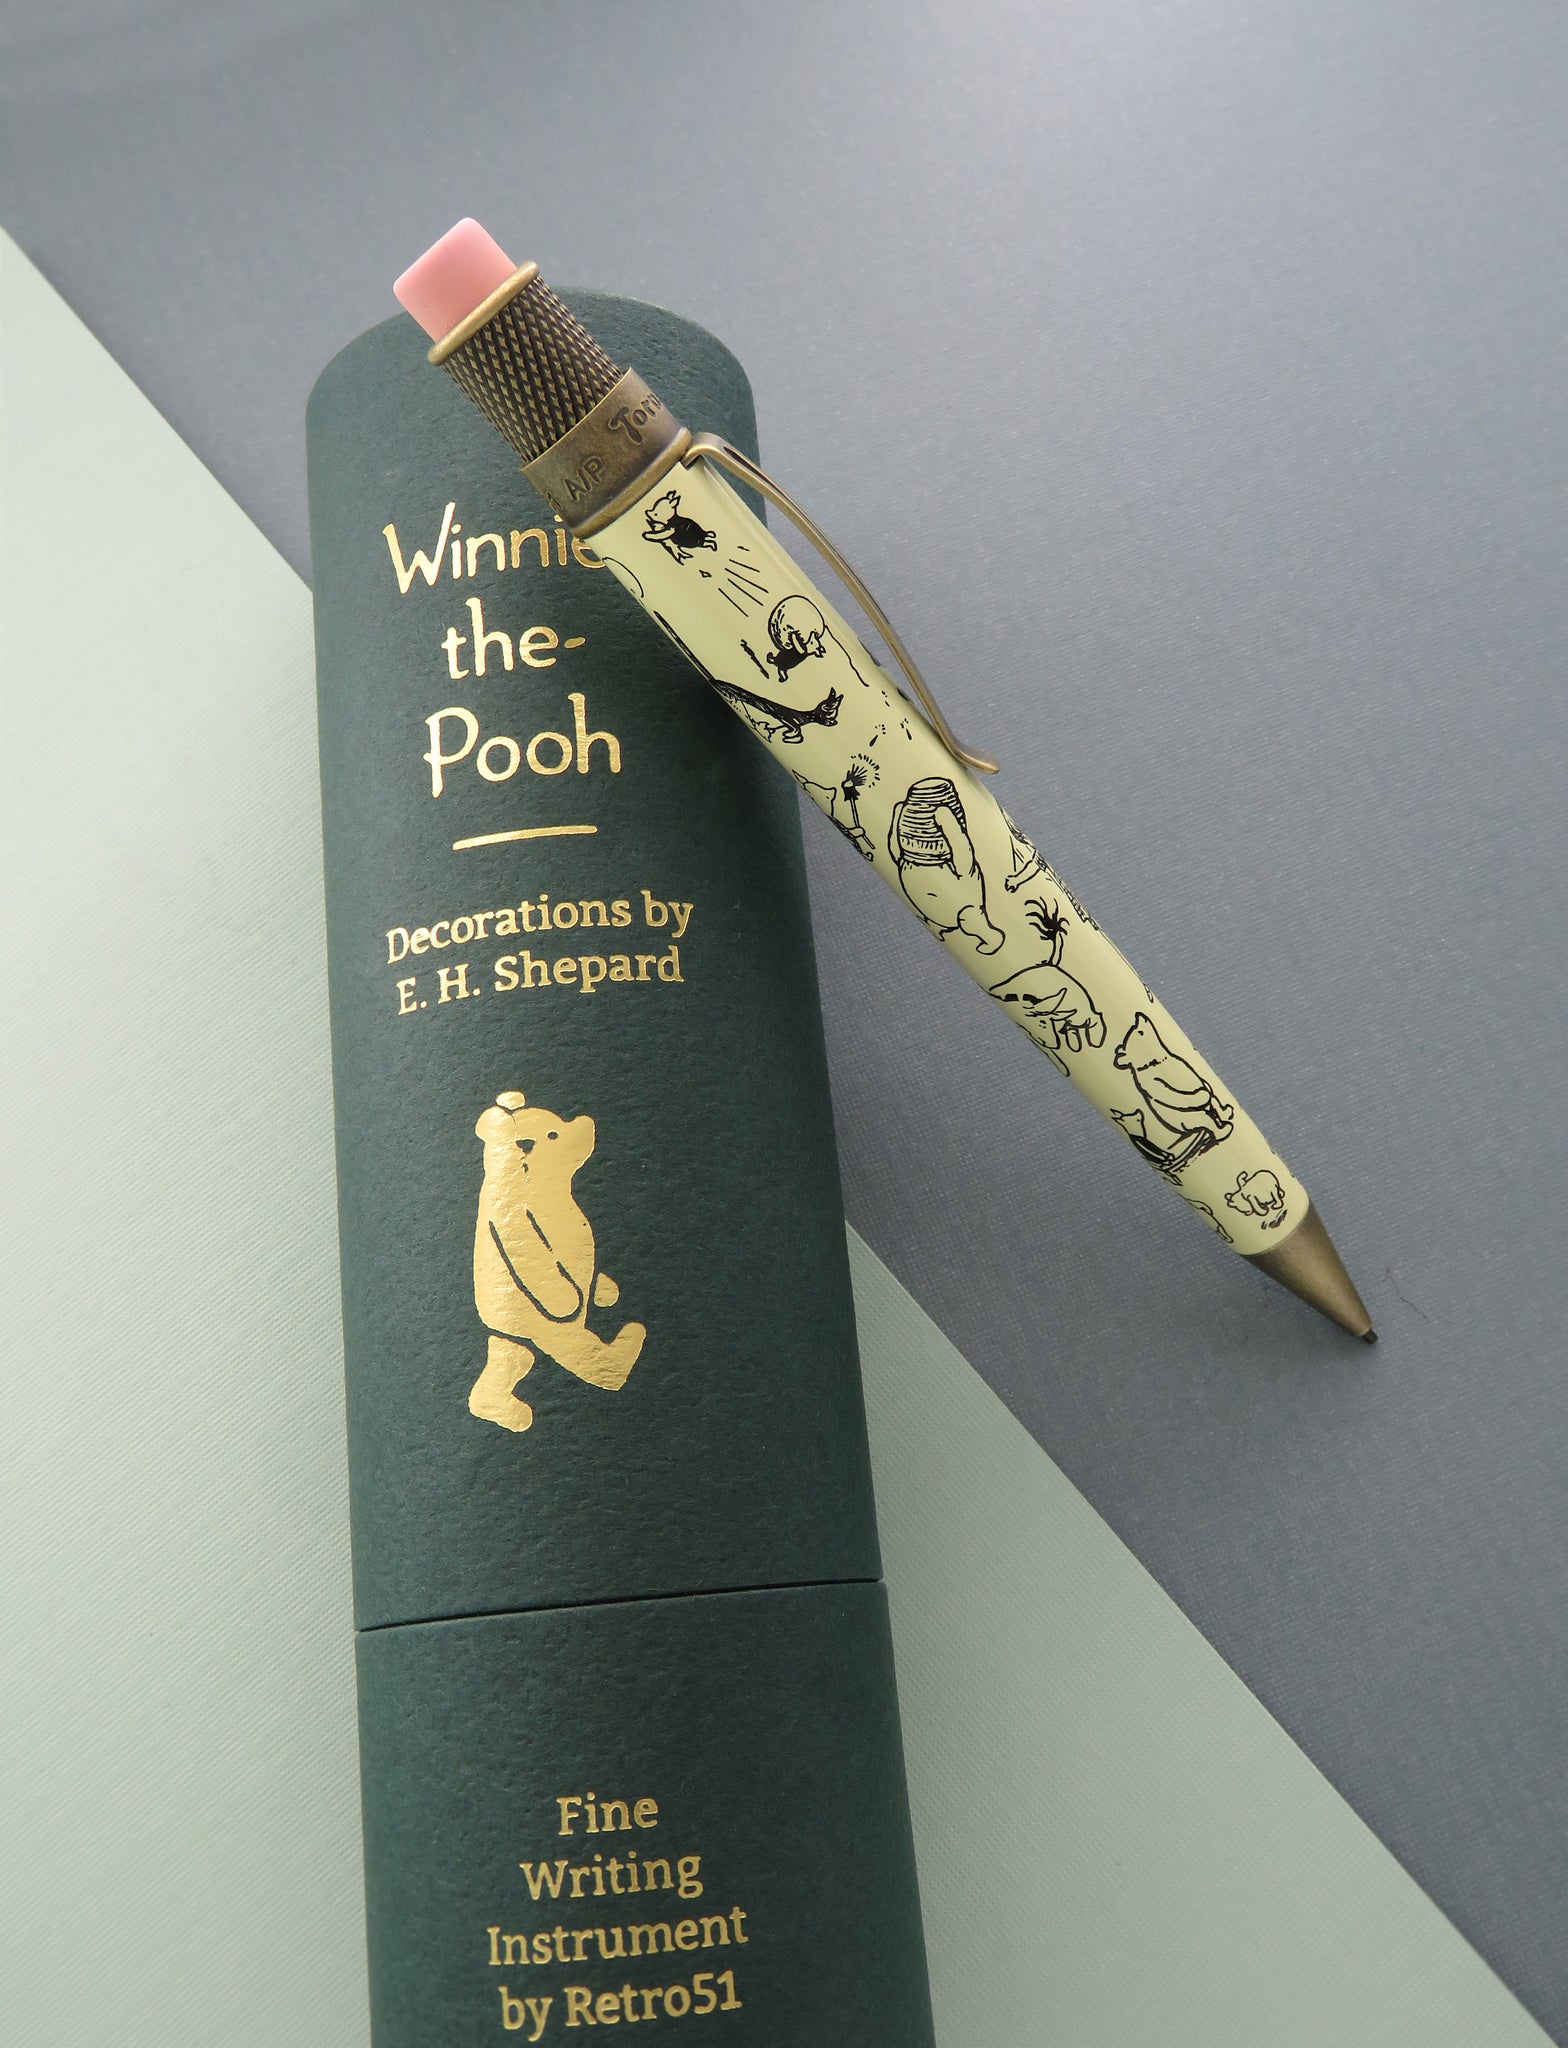 A.A. Milne Winnie-the-Pooh Decorations by E.H. Shepard Pencil